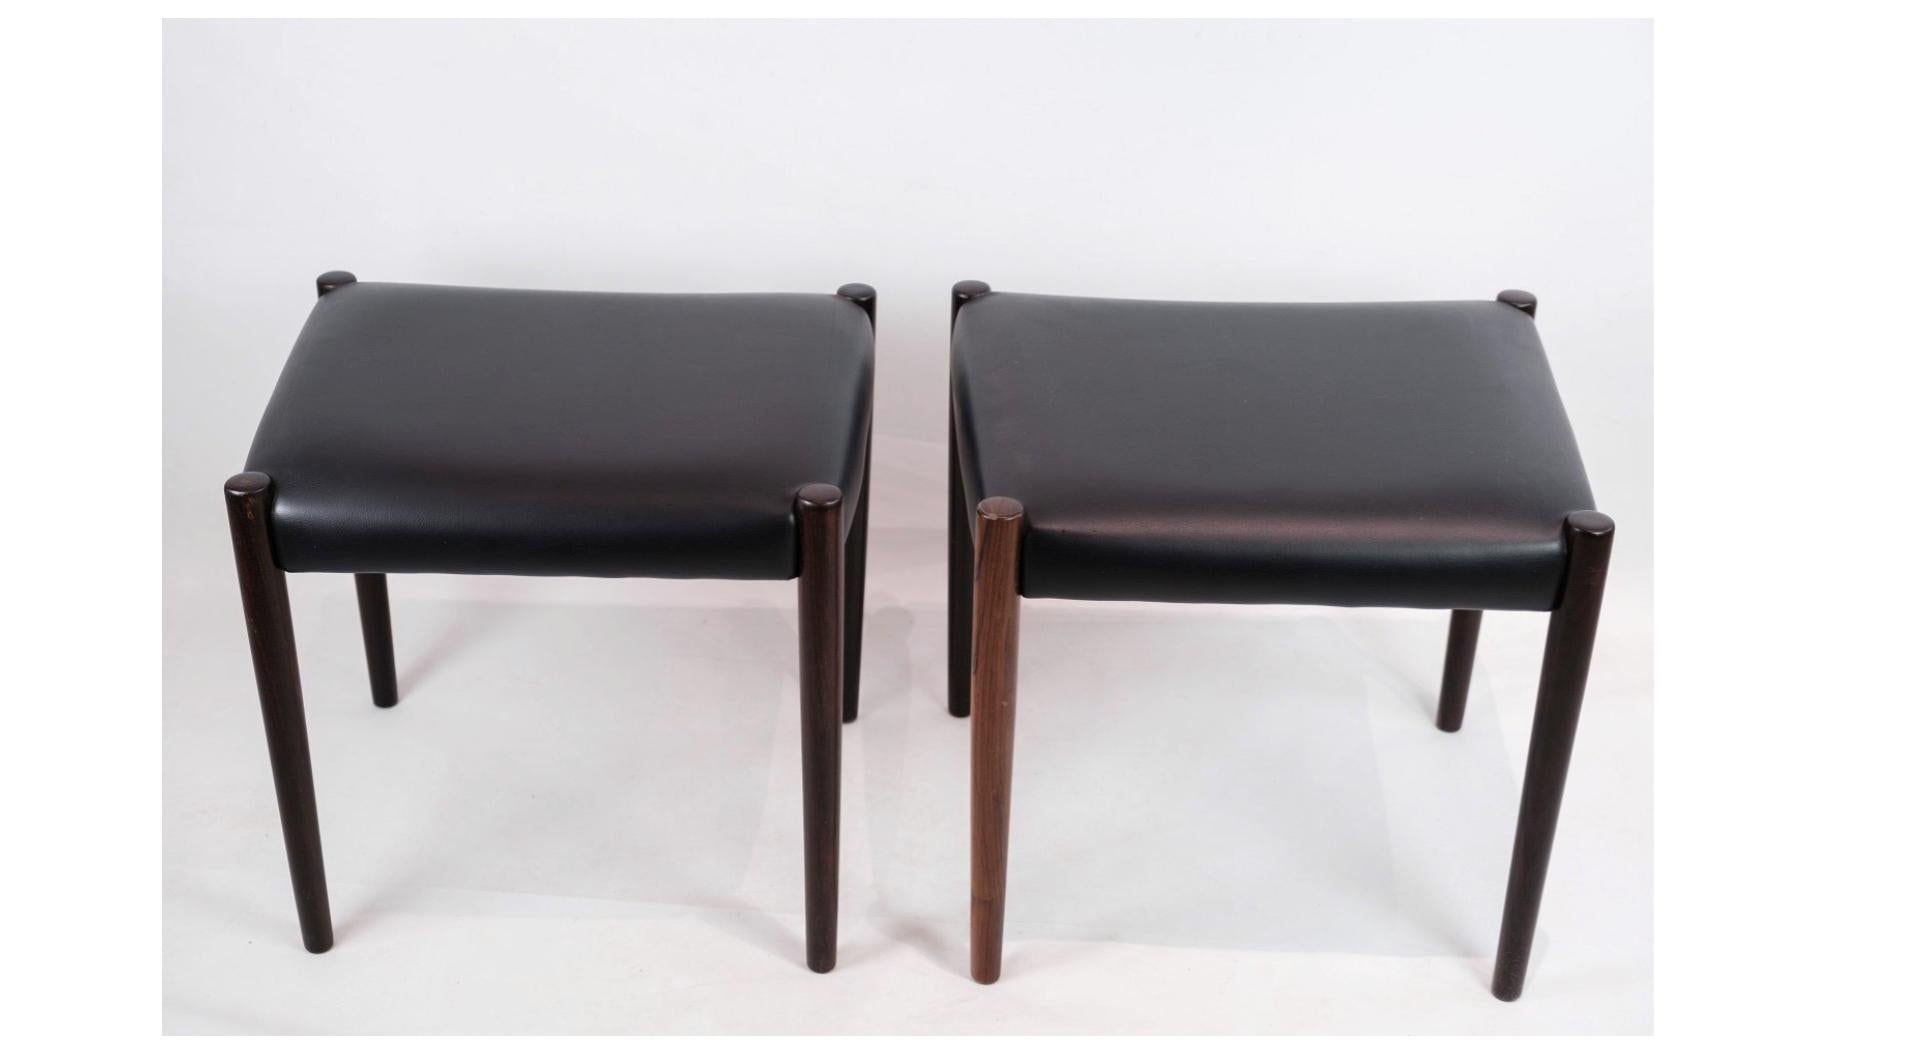 Set Of 2 Stools Made In Rosewood & Black Leather Seat From 1960s In Good Condition For Sale In Lejre, DK